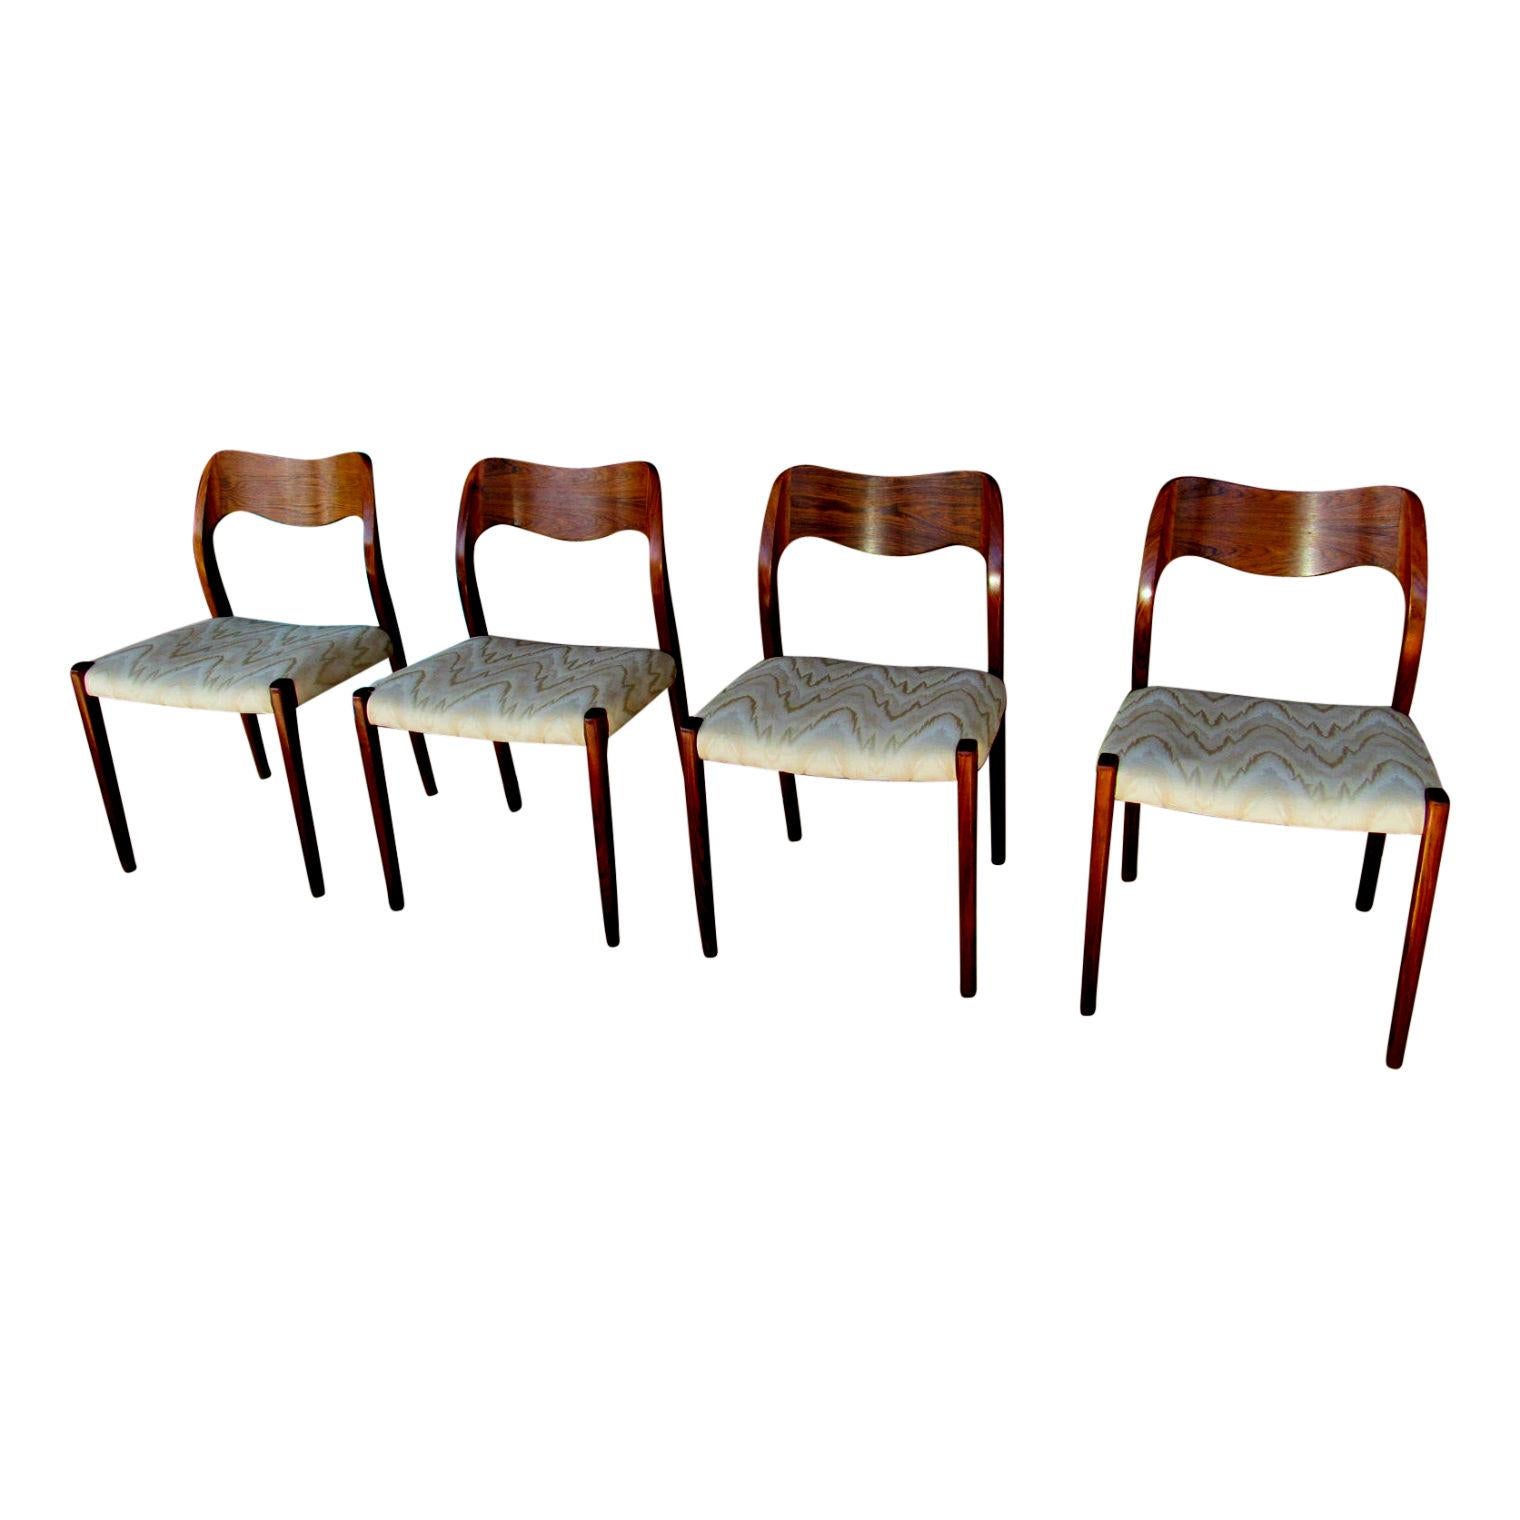 Model 71 rosewood dining chairs by Niels O. Møller for J. L. Møllers, 1951. This set of six model 71 dining chairs made from solid Rio-palisander (rosewood) was designed in 1951 by Niels Otto Møller and produced by J. L. Møllers Møbelfabrik in the